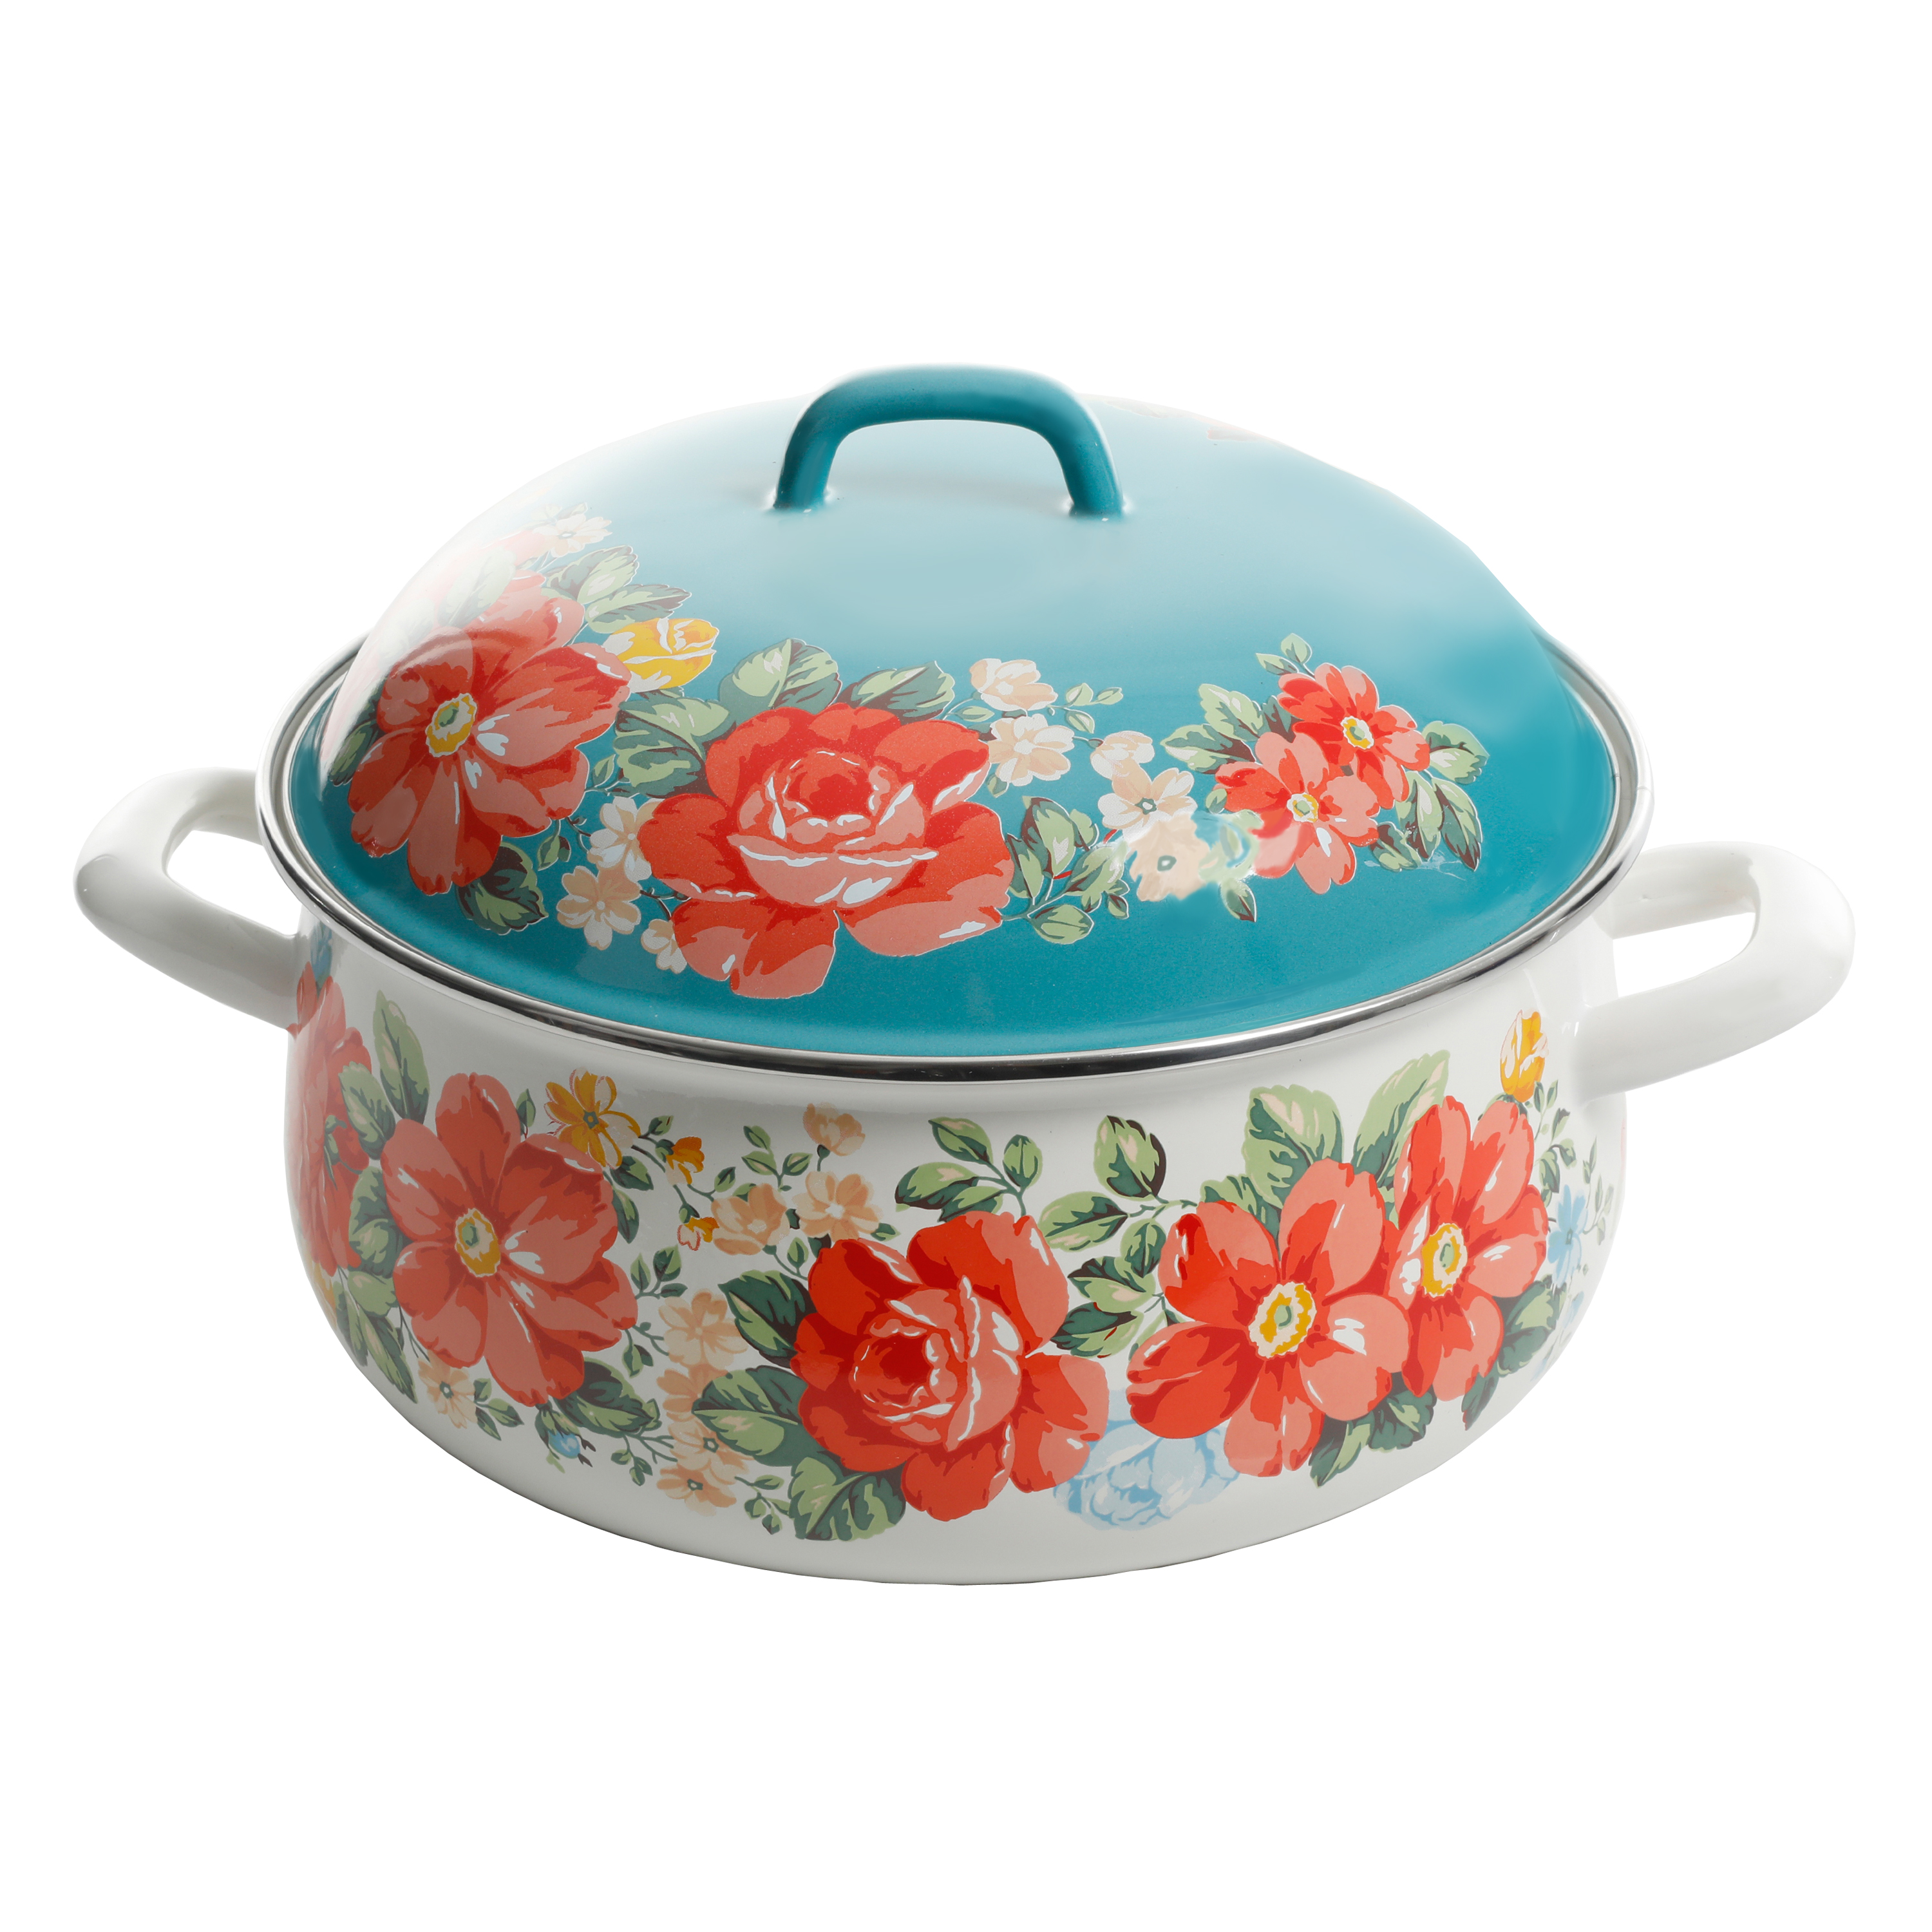 The Pioneer Woman Vintage Floral 4 Quart Enamel Cast Iron Dutch Oven with Lid - image 2 of 4